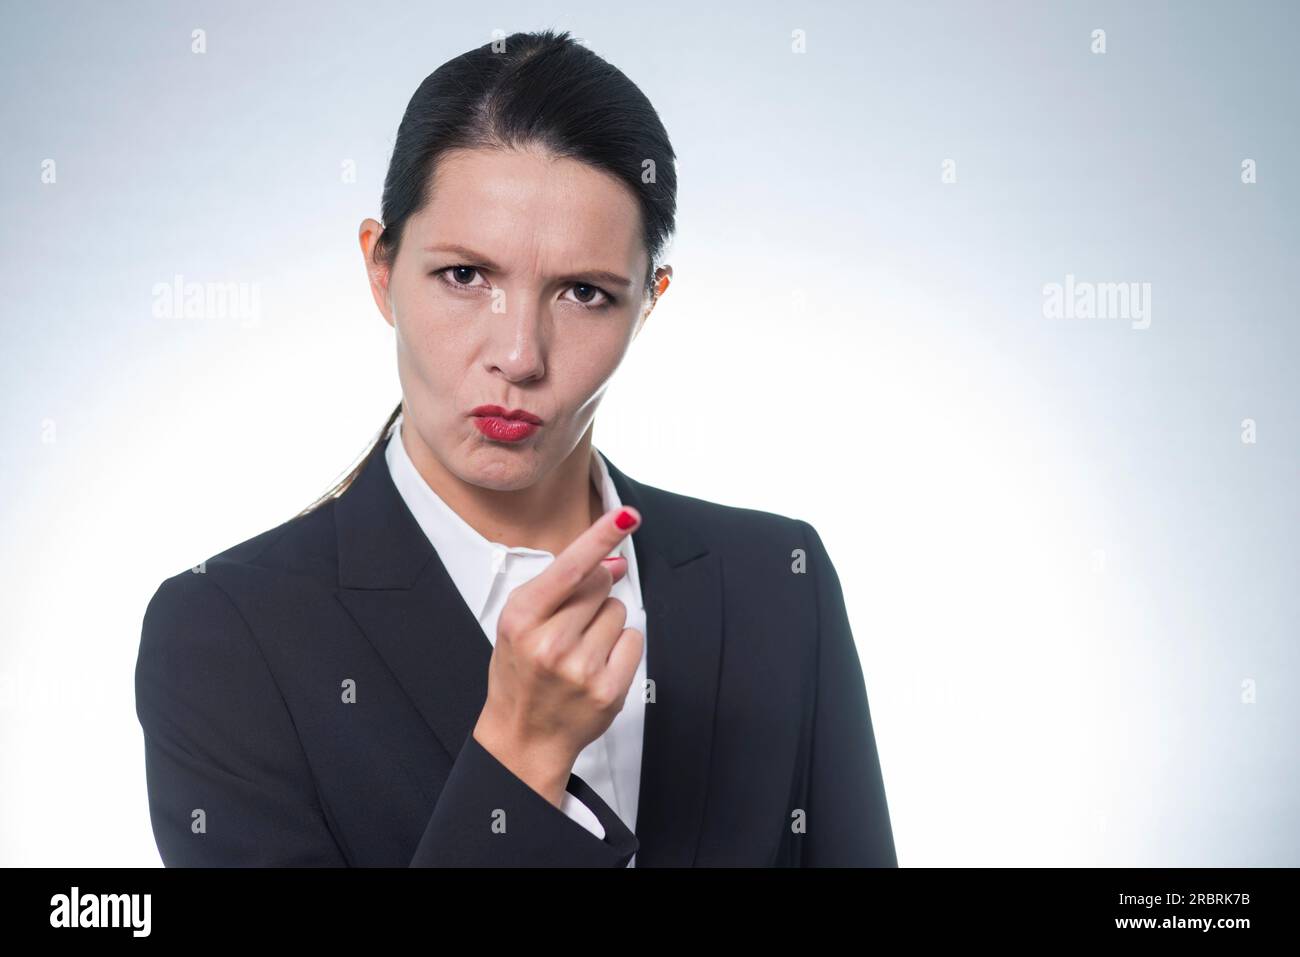 Stern young business woman or manageress making a finger gesture of displeasure as she frowns at the camera, studio portrait with copyspace Stock Photo